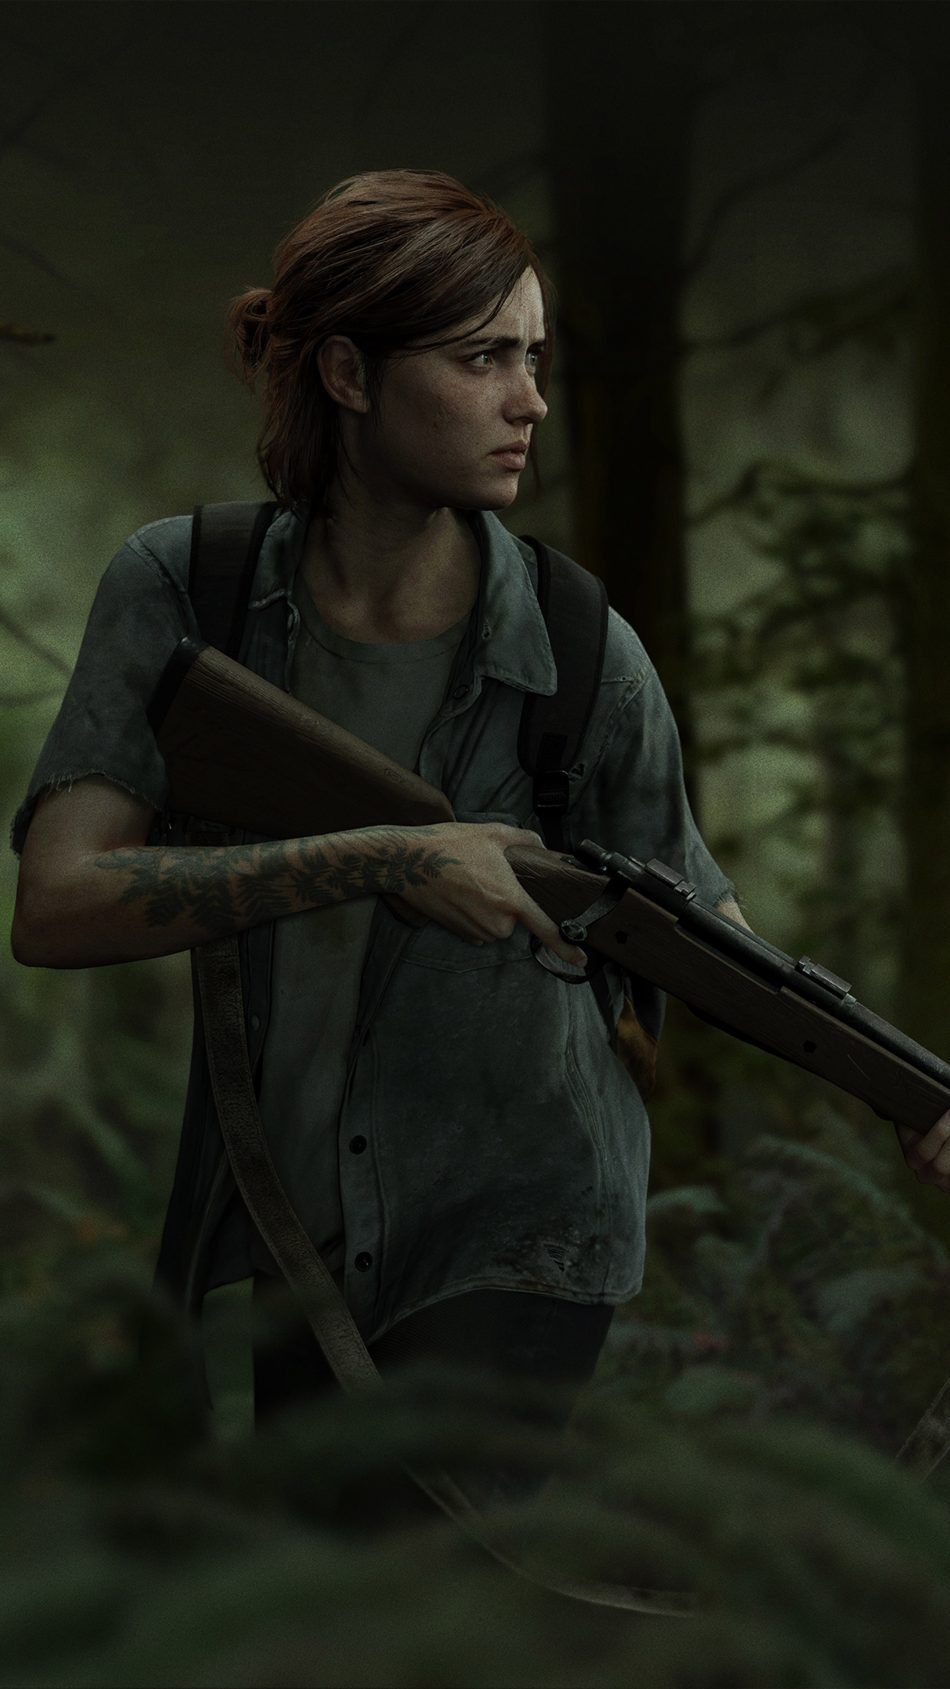 New Ellie The Last of Us 2 Wallpapers